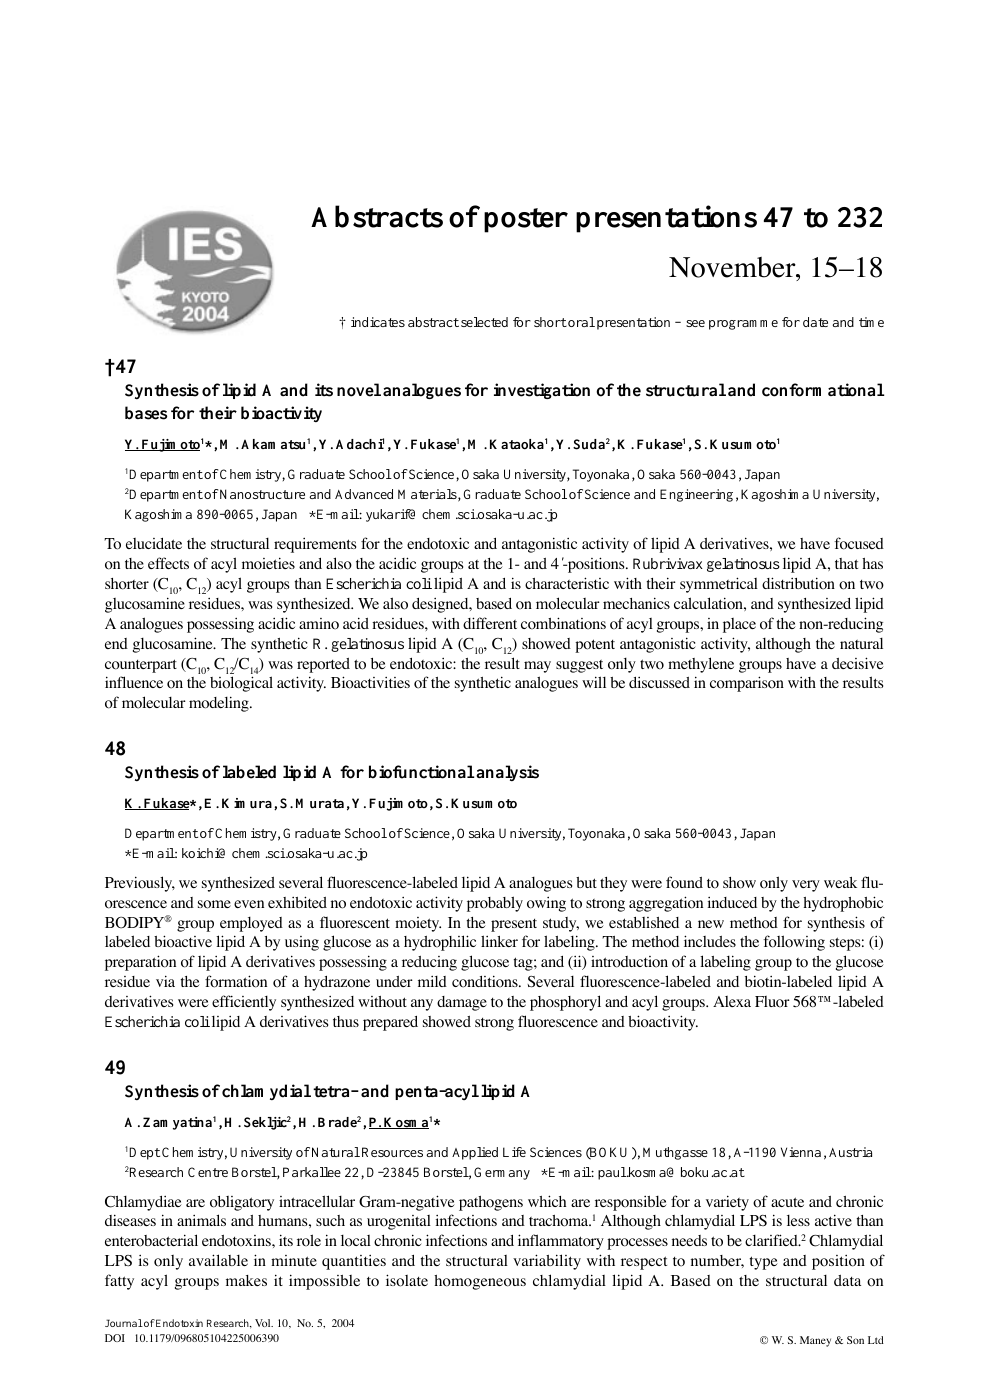 Abstracts Of Poster Presentations 47 To 232 November 15 18